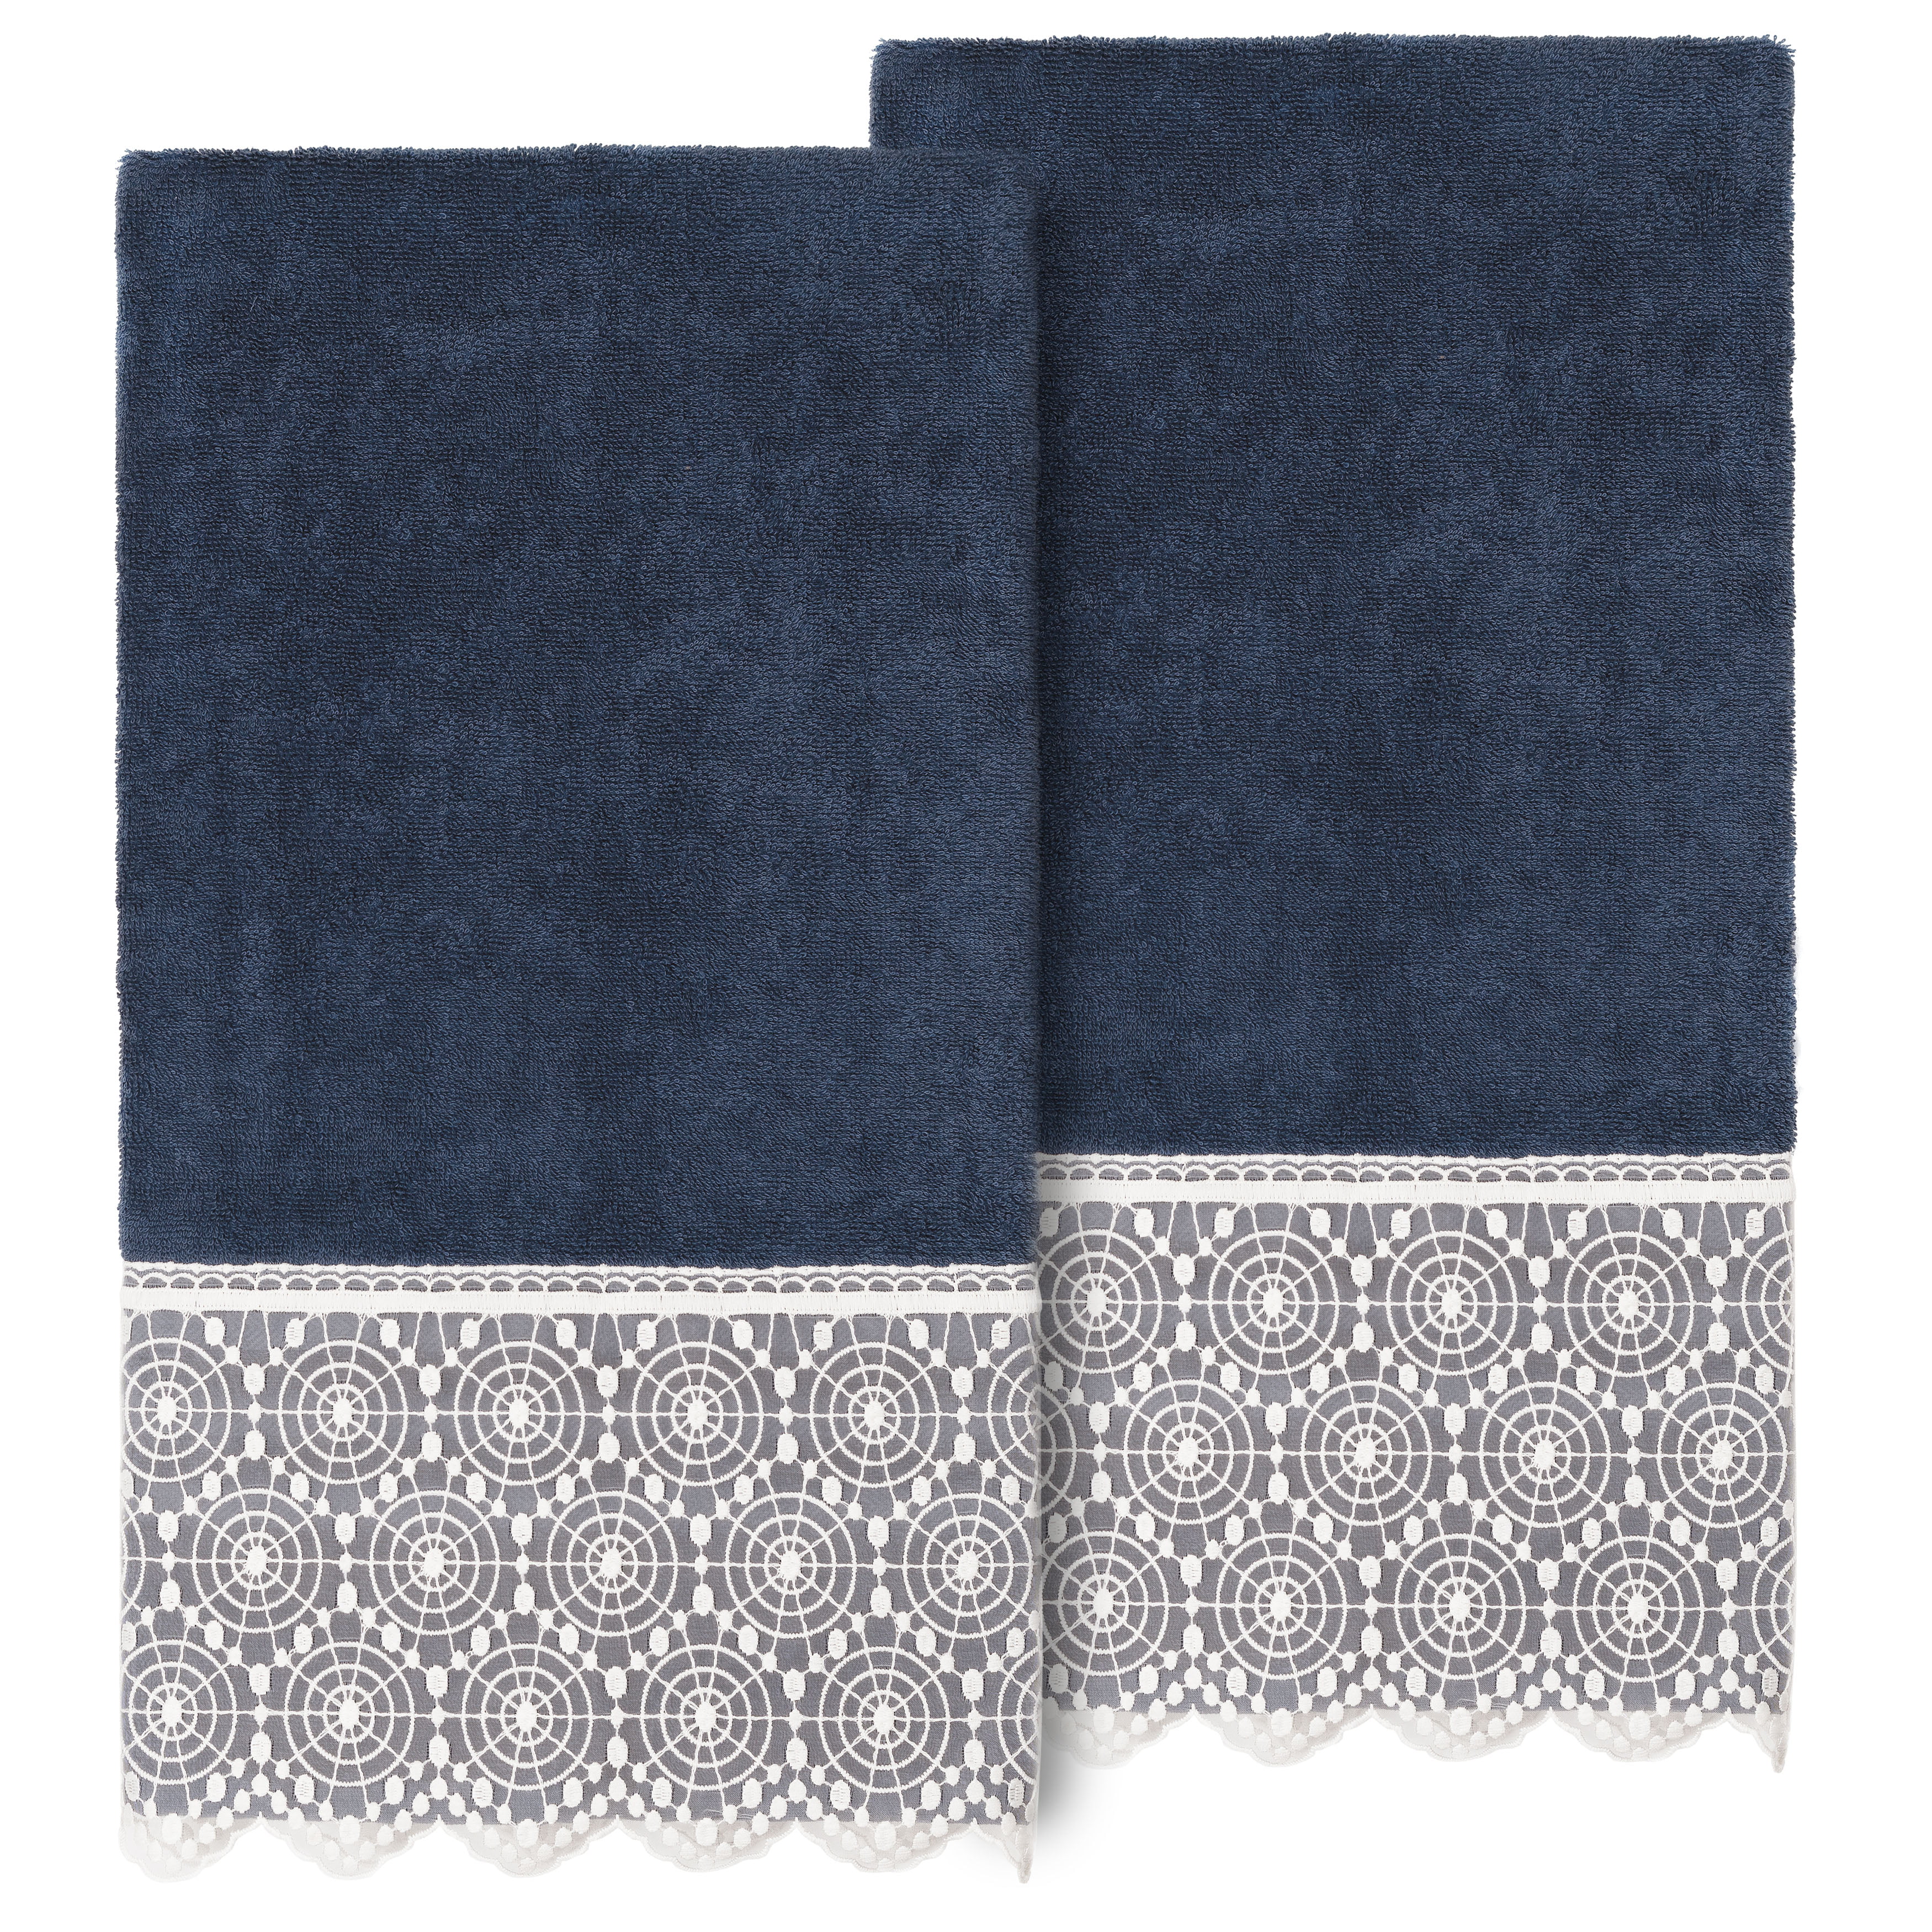 2pc Arian Cream Lace Embellished Hand Towels Dark Gray - Linum Home Textiles